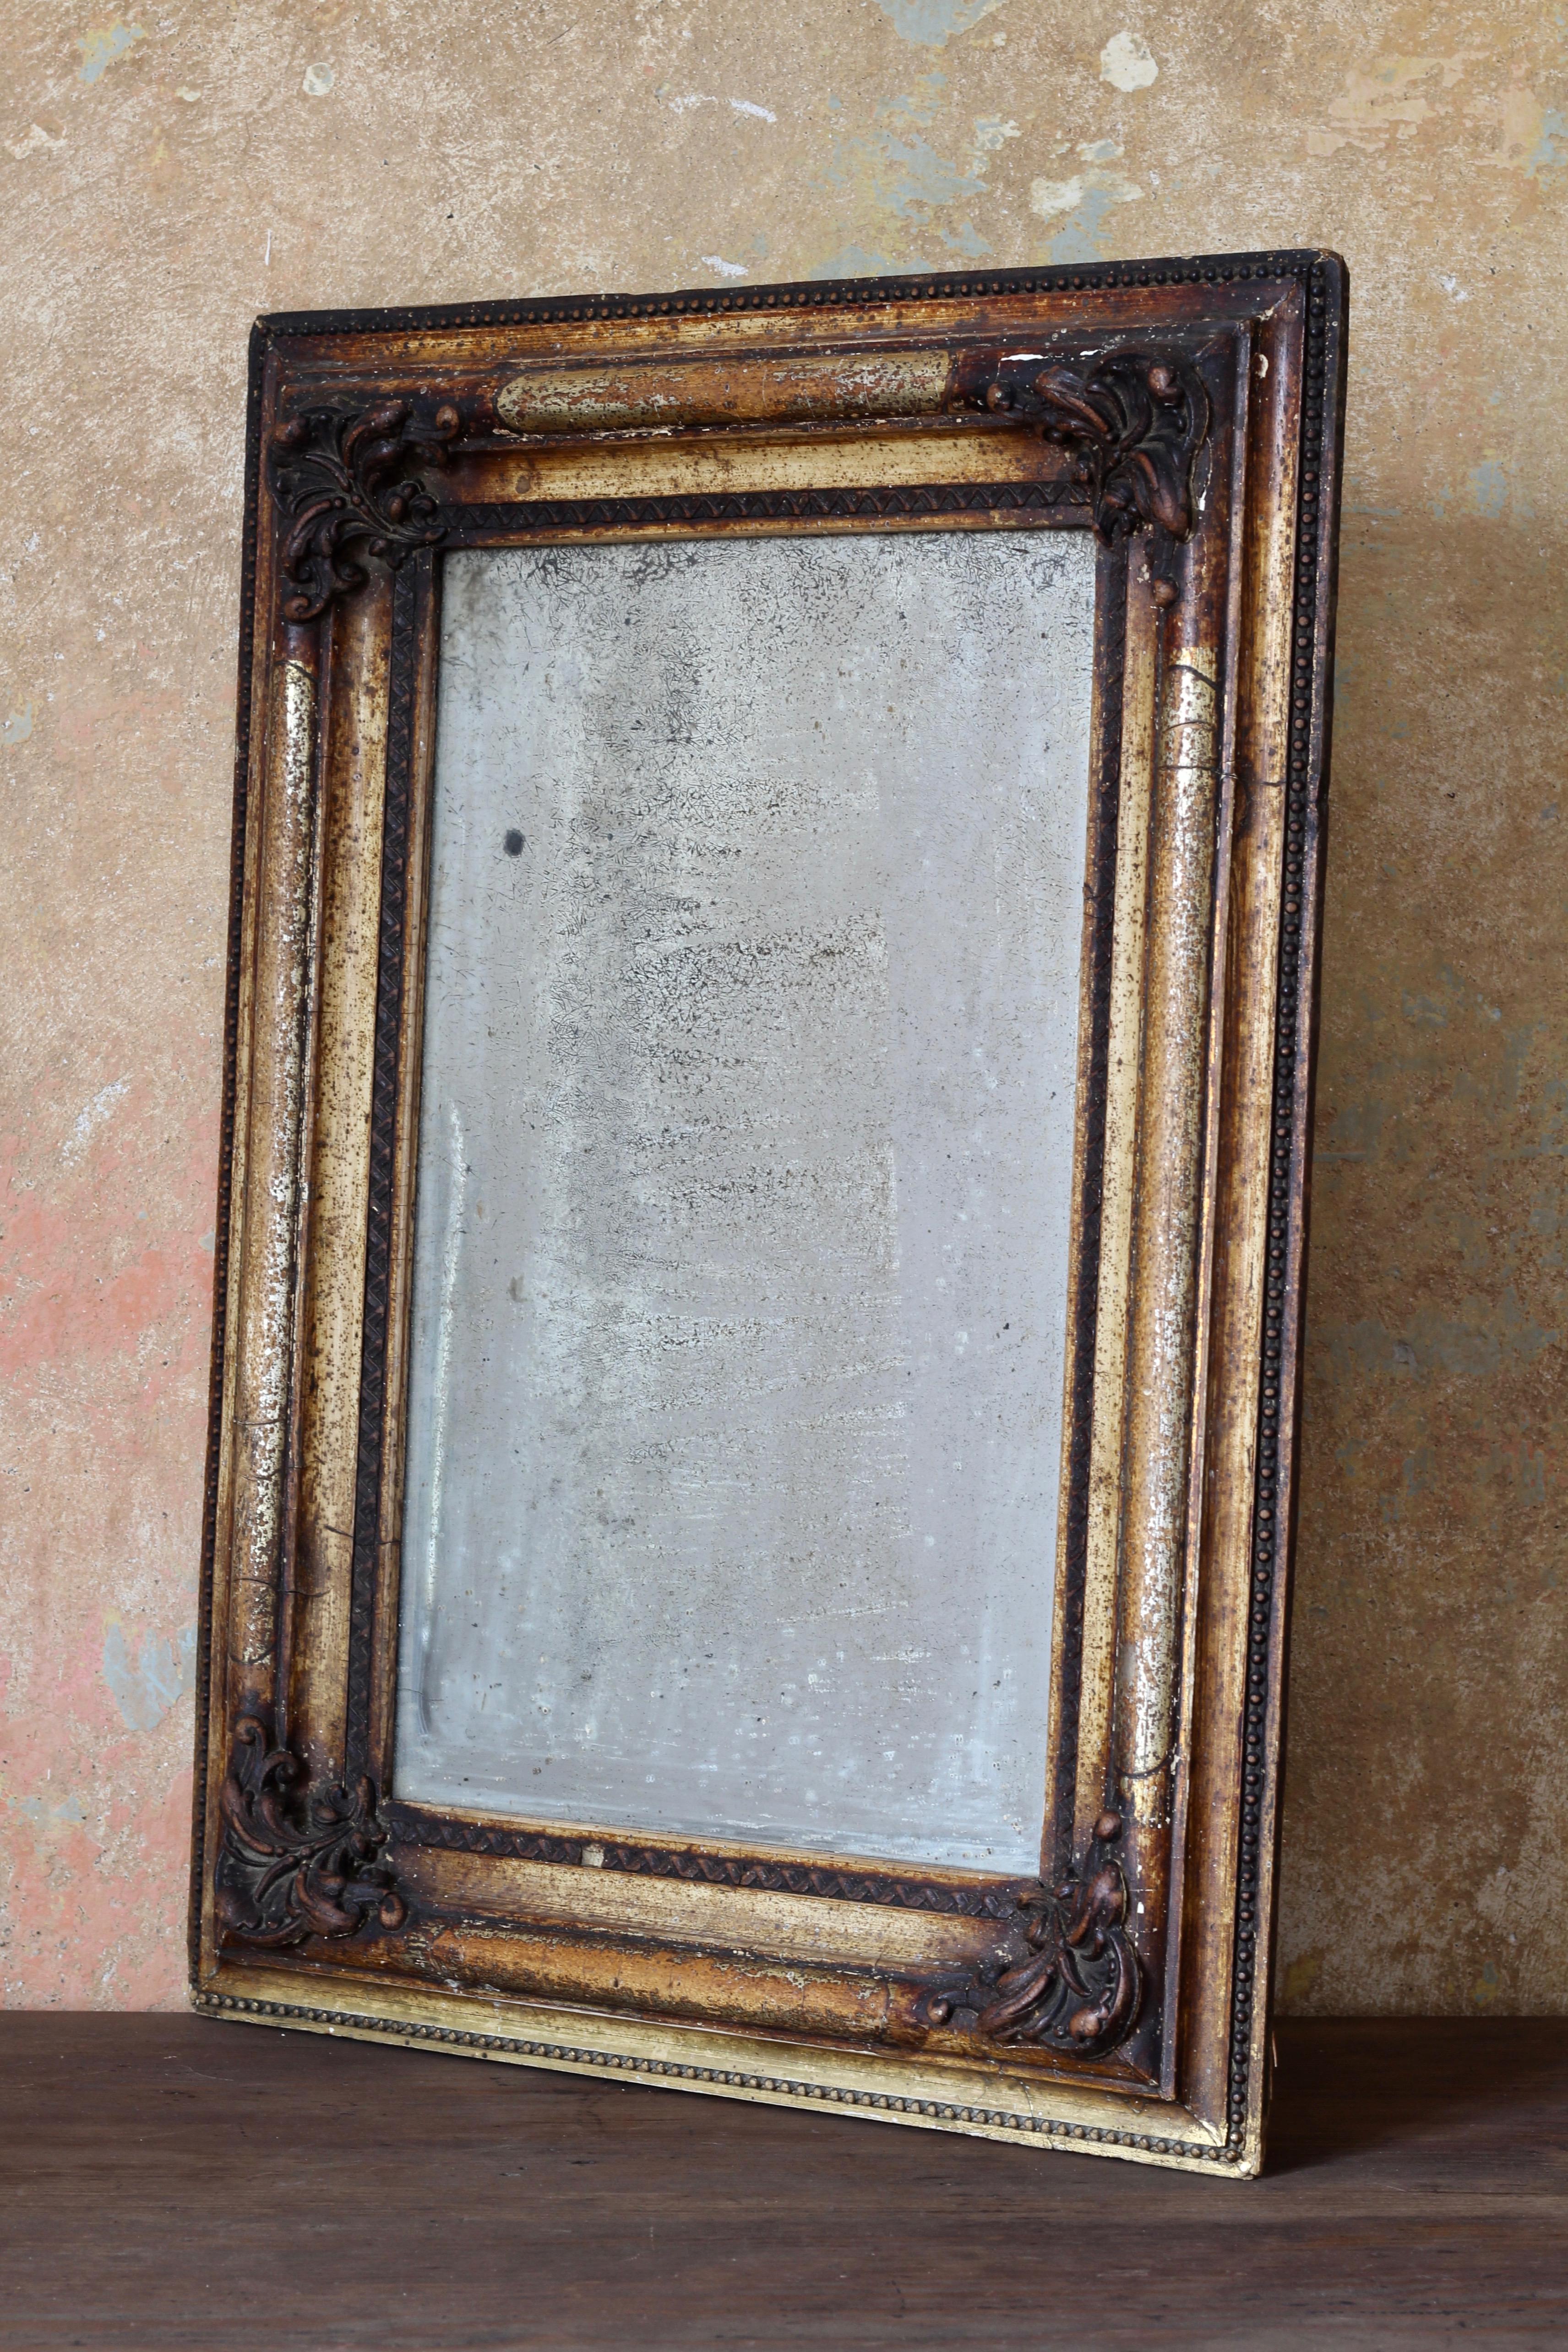 This wall mirror in original wooden frame has aged beautifully and acquired a unique patina over the time. The wooden frame in old-gold color has some beautiful decorative floral ornaments. The surface of the mirror must have seen it all-over the